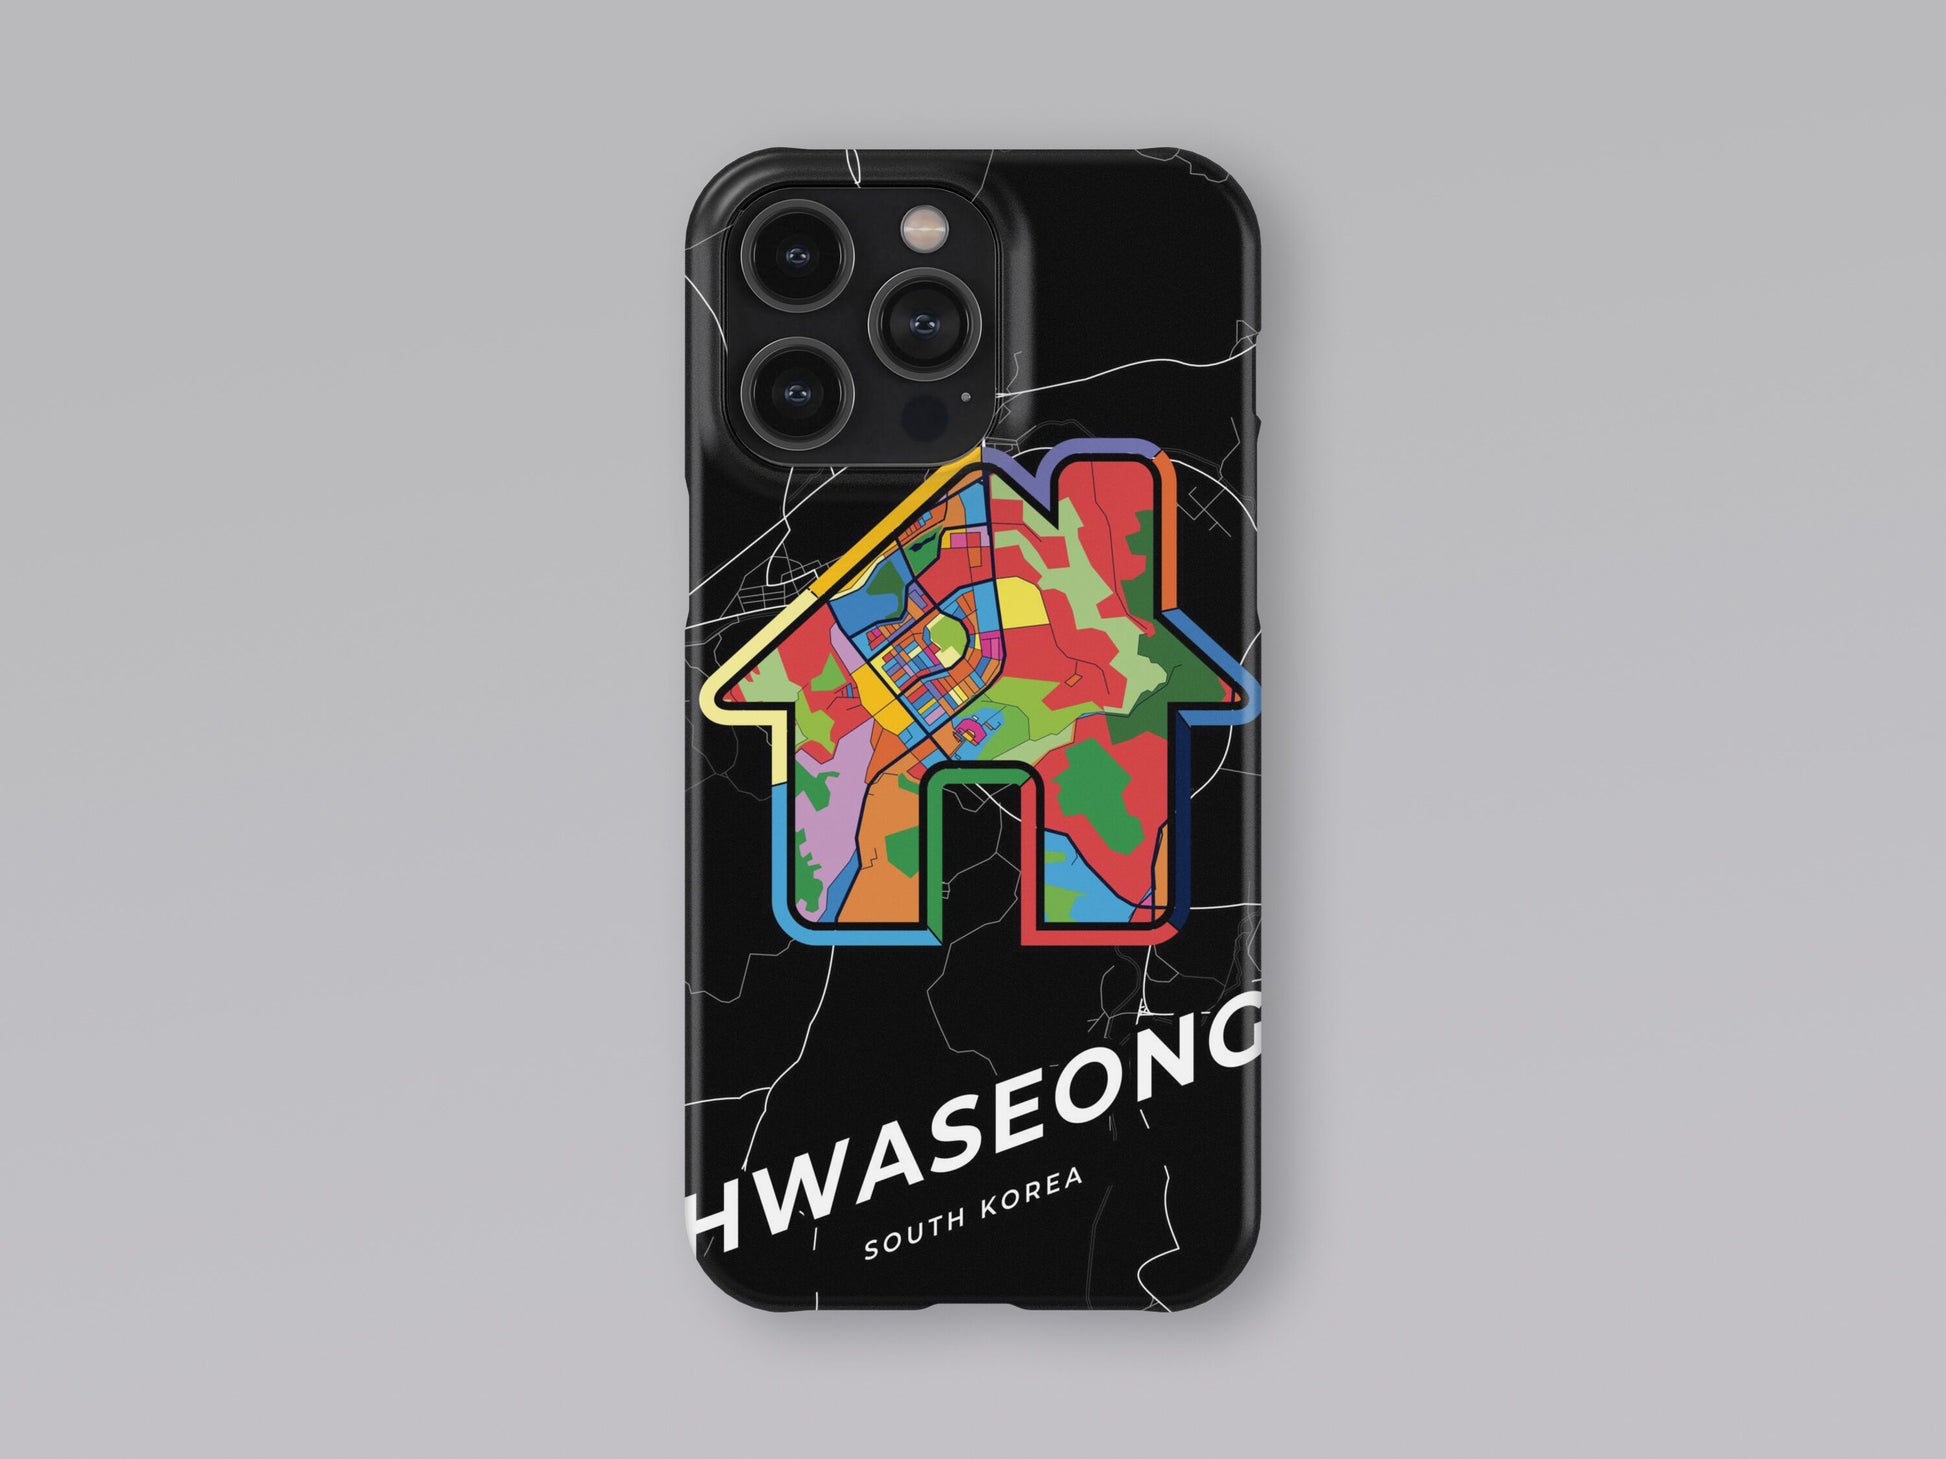 Hwaseong South Korea slim phone case with colorful icon. Birthday, wedding or housewarming gift. Couple match cases. 3